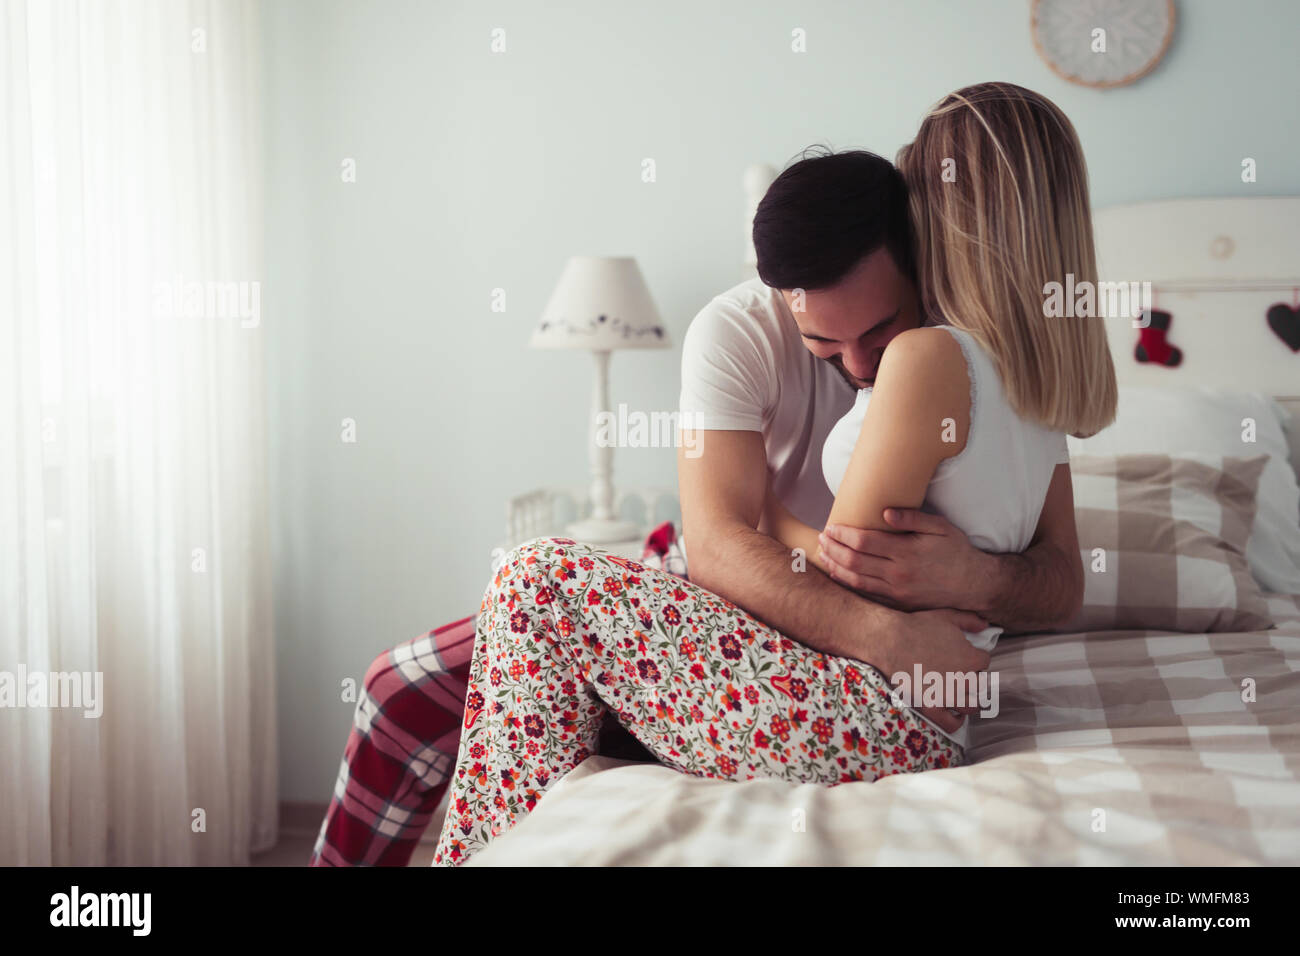 Young Couple Having Romantic Time In Bedroom Stock Photo